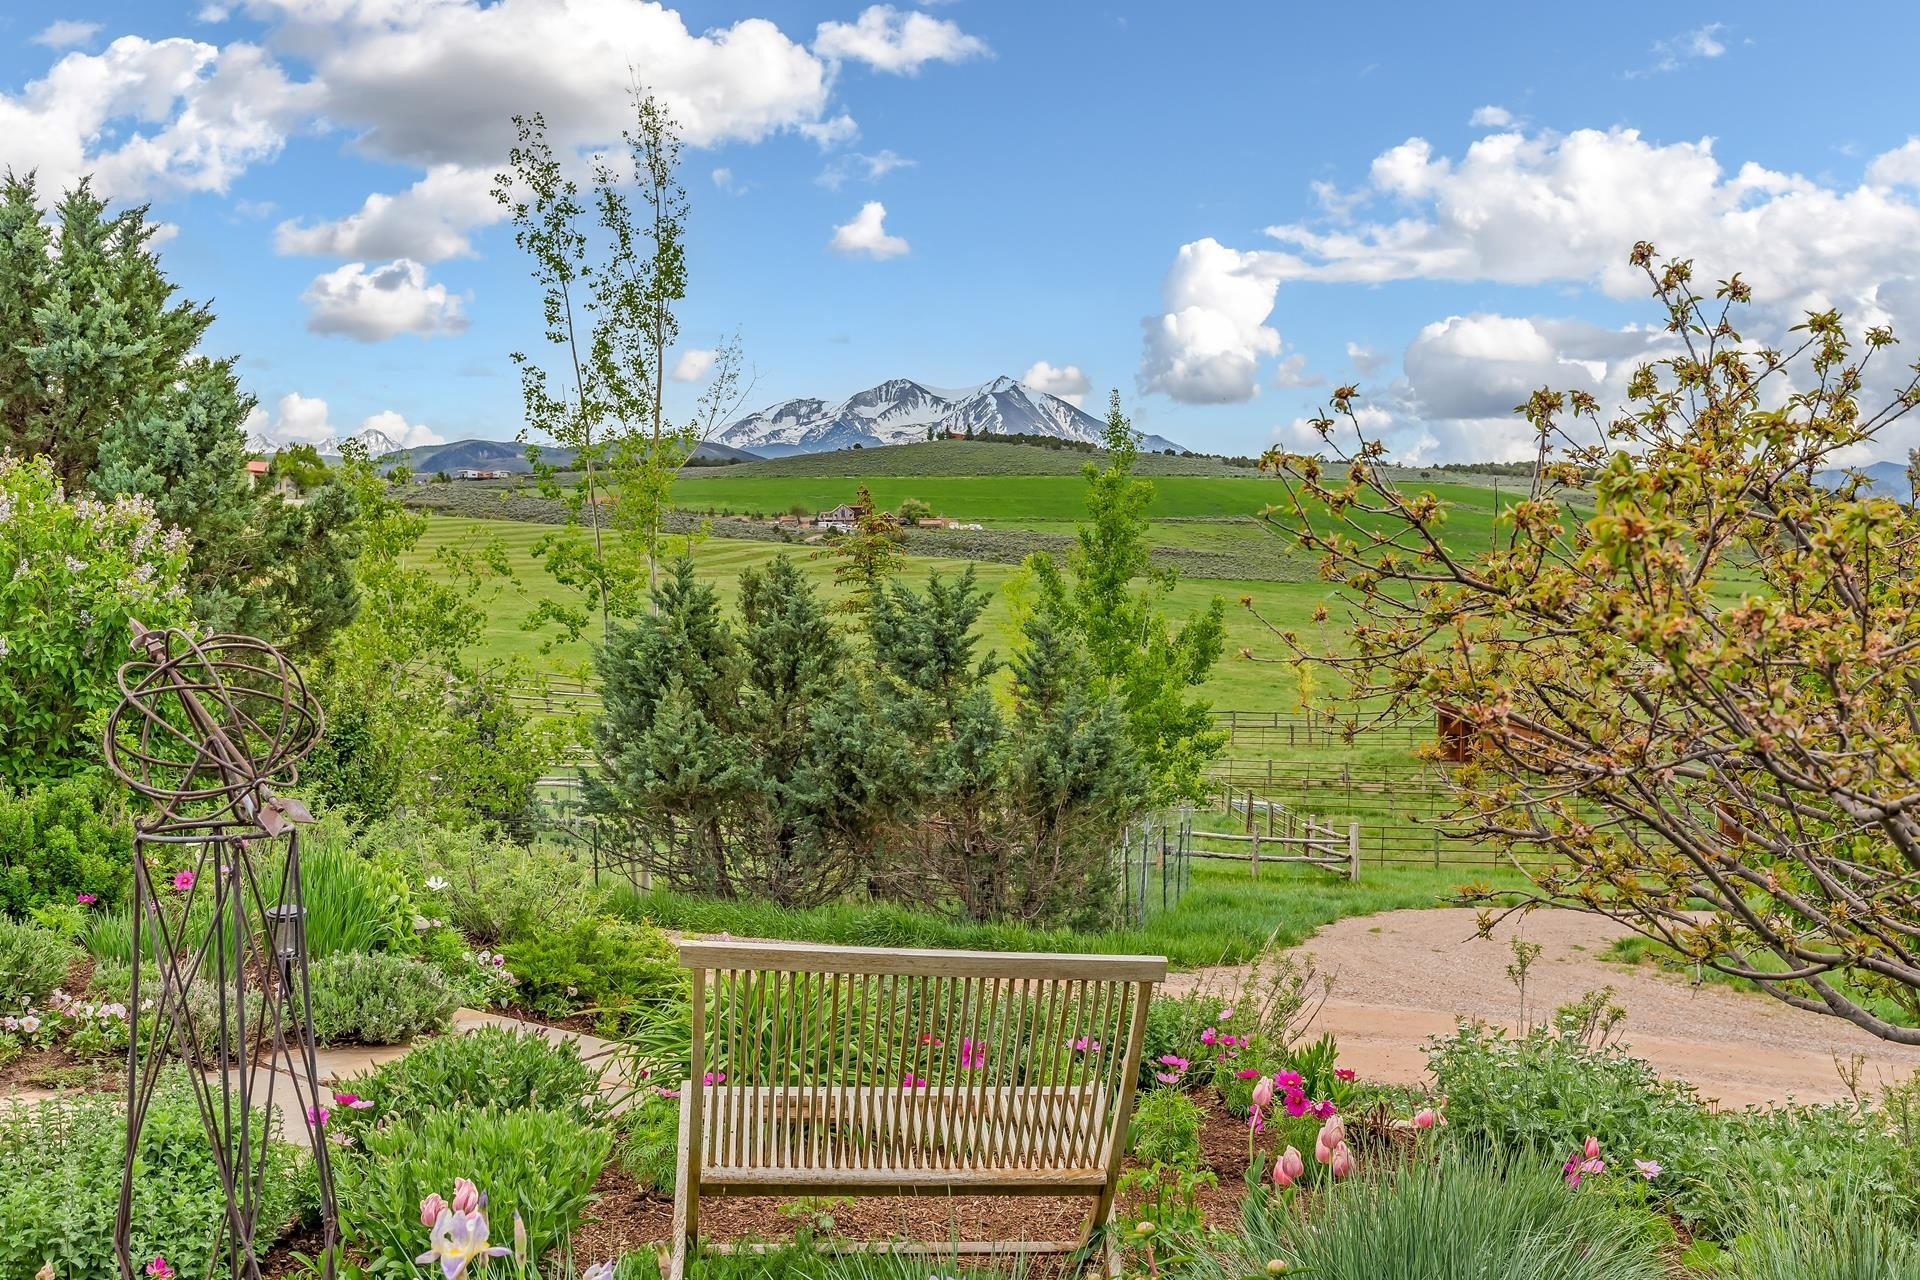 19. Farm and Ranch Properties for Sale at Carbondale, CO 81623